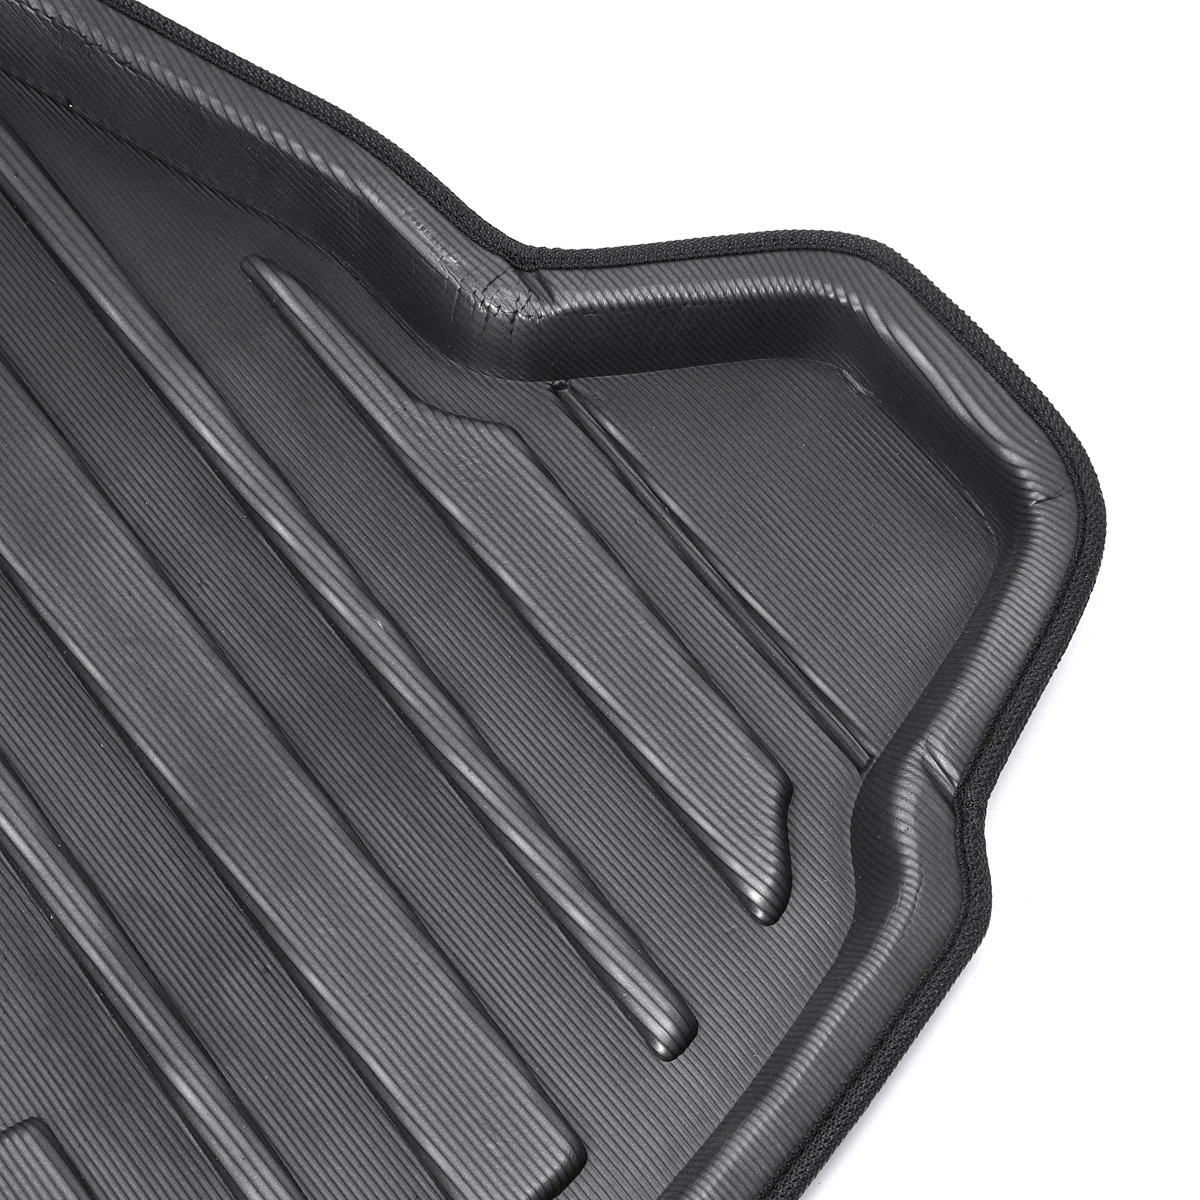 Buy Boot Mat Rear Trunk Liner Cargo Floor Tray Carpet Mud Pad Kick Guard Protector waterproof For Toyota C-HR CHR 2017 2018 2019+ on